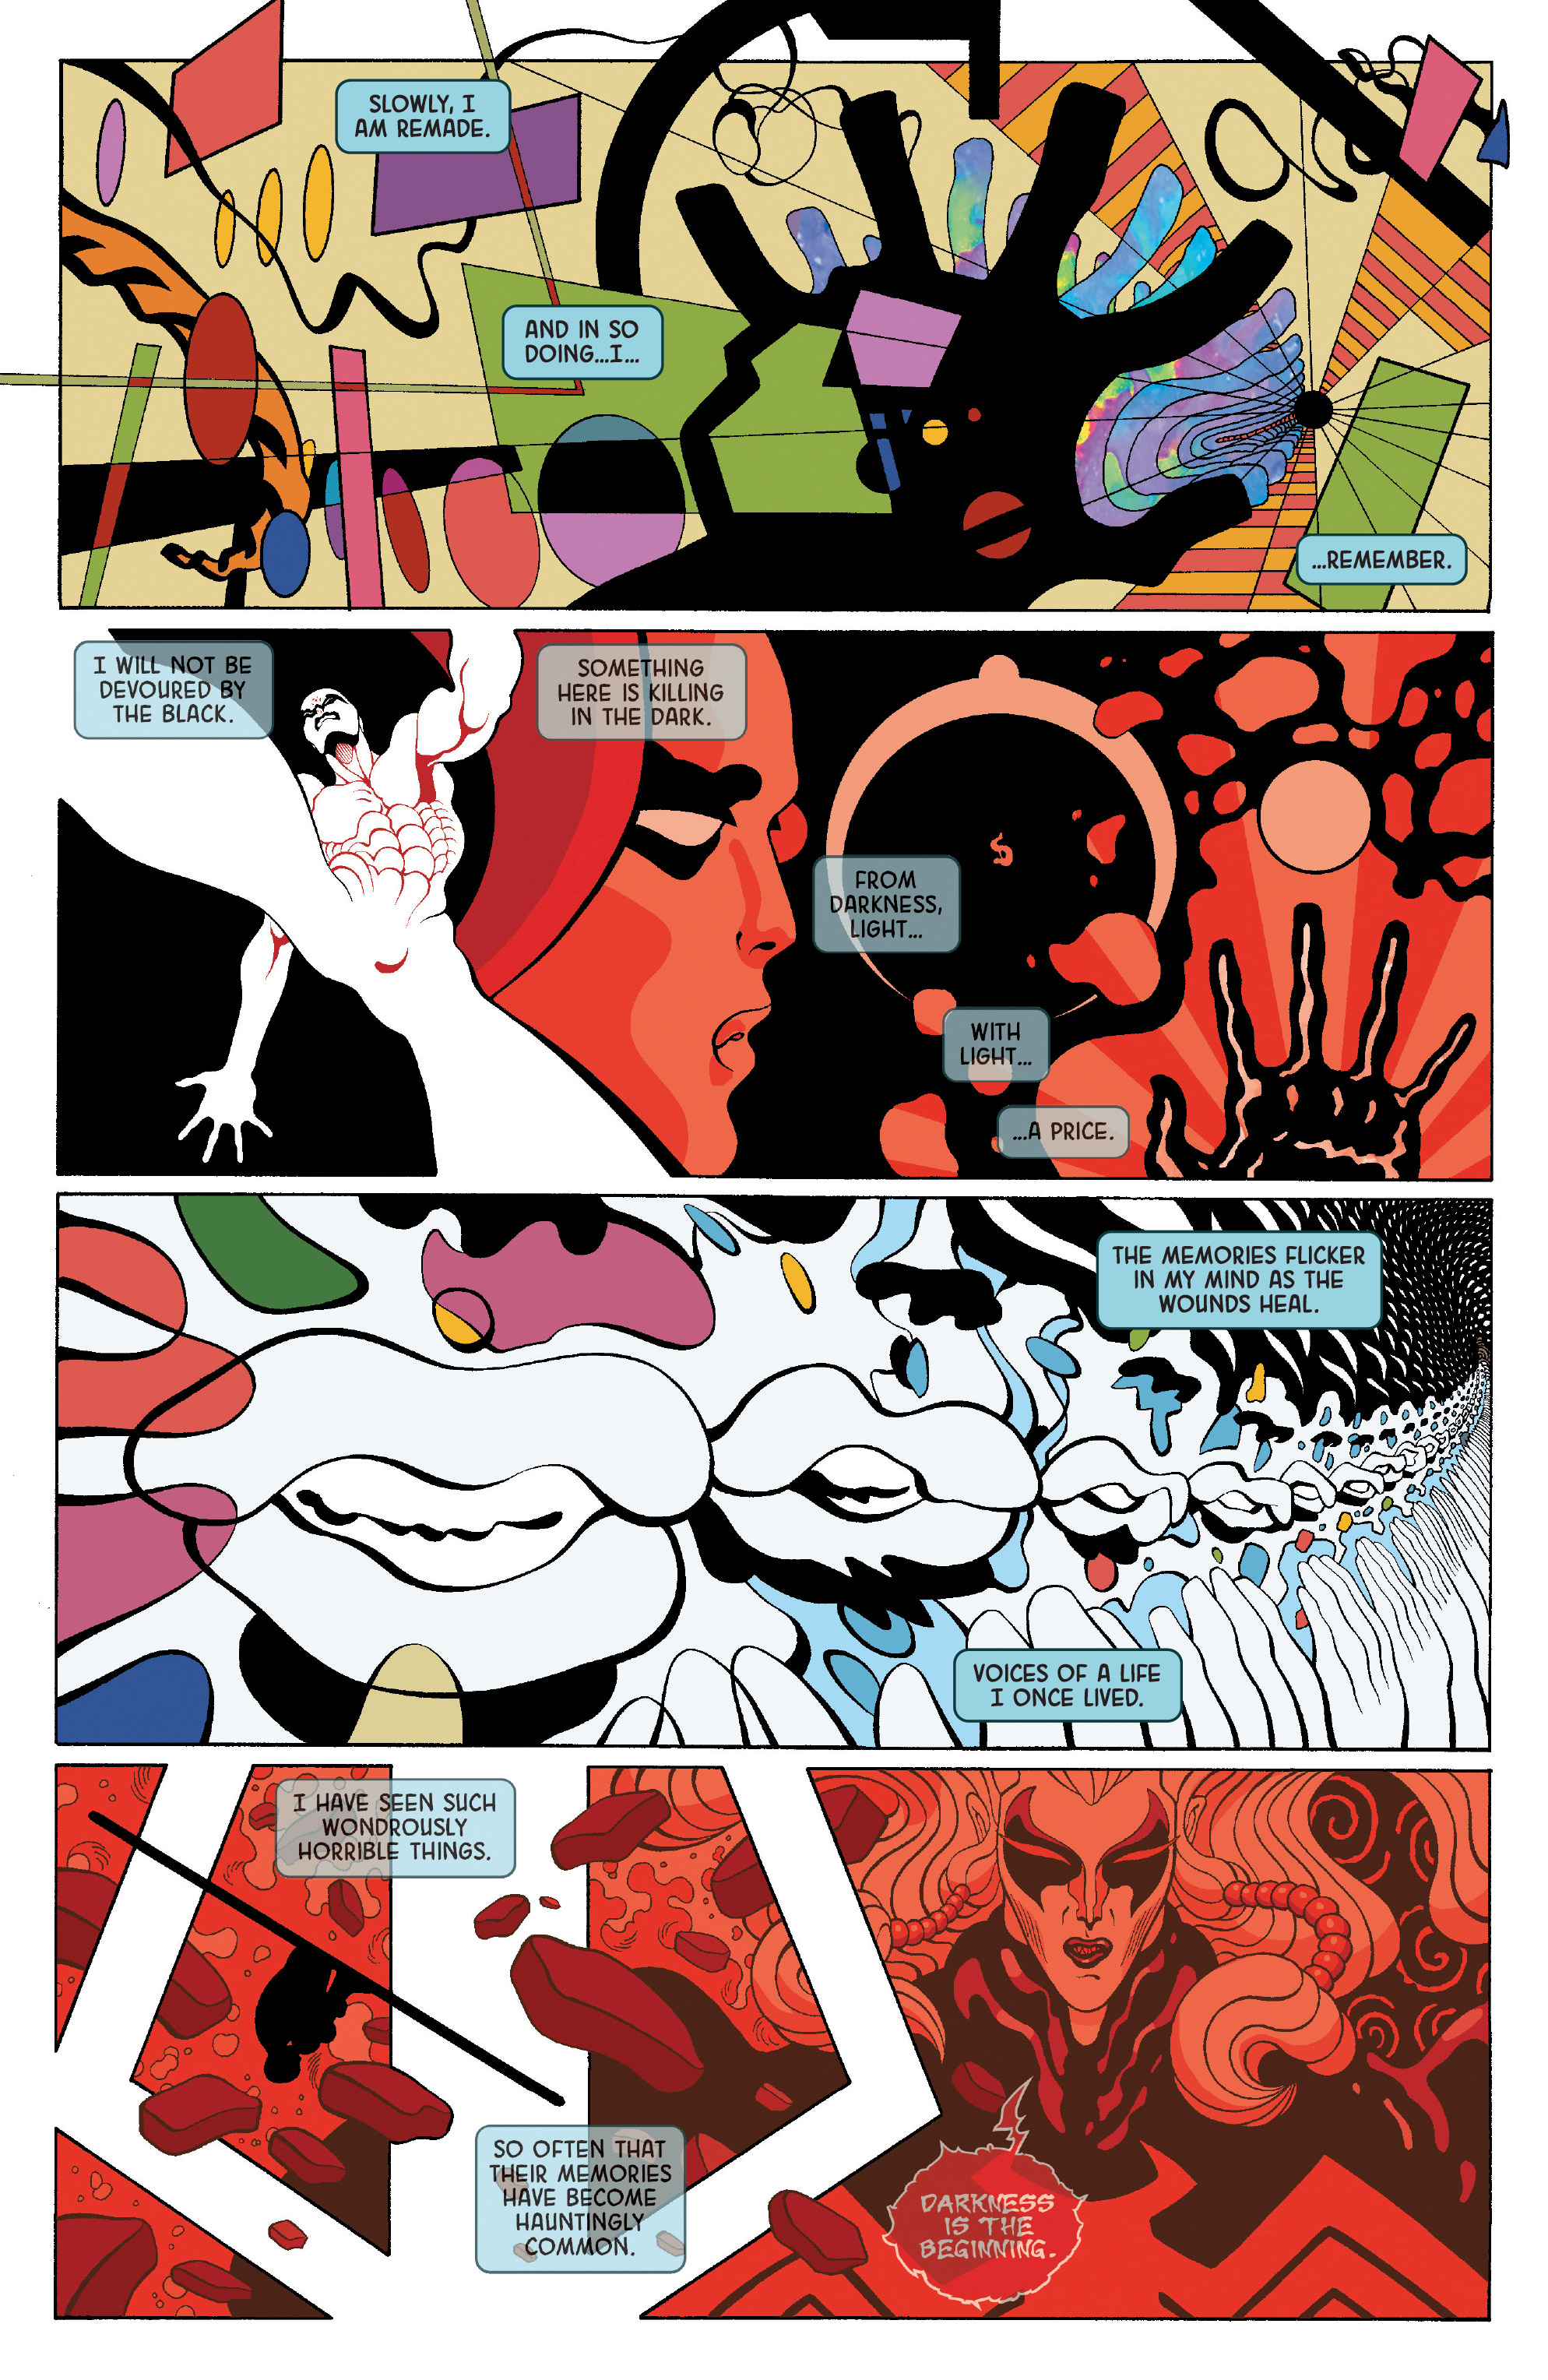 Silver Surfer: Black (2019-): Chapter 5 - Page 4